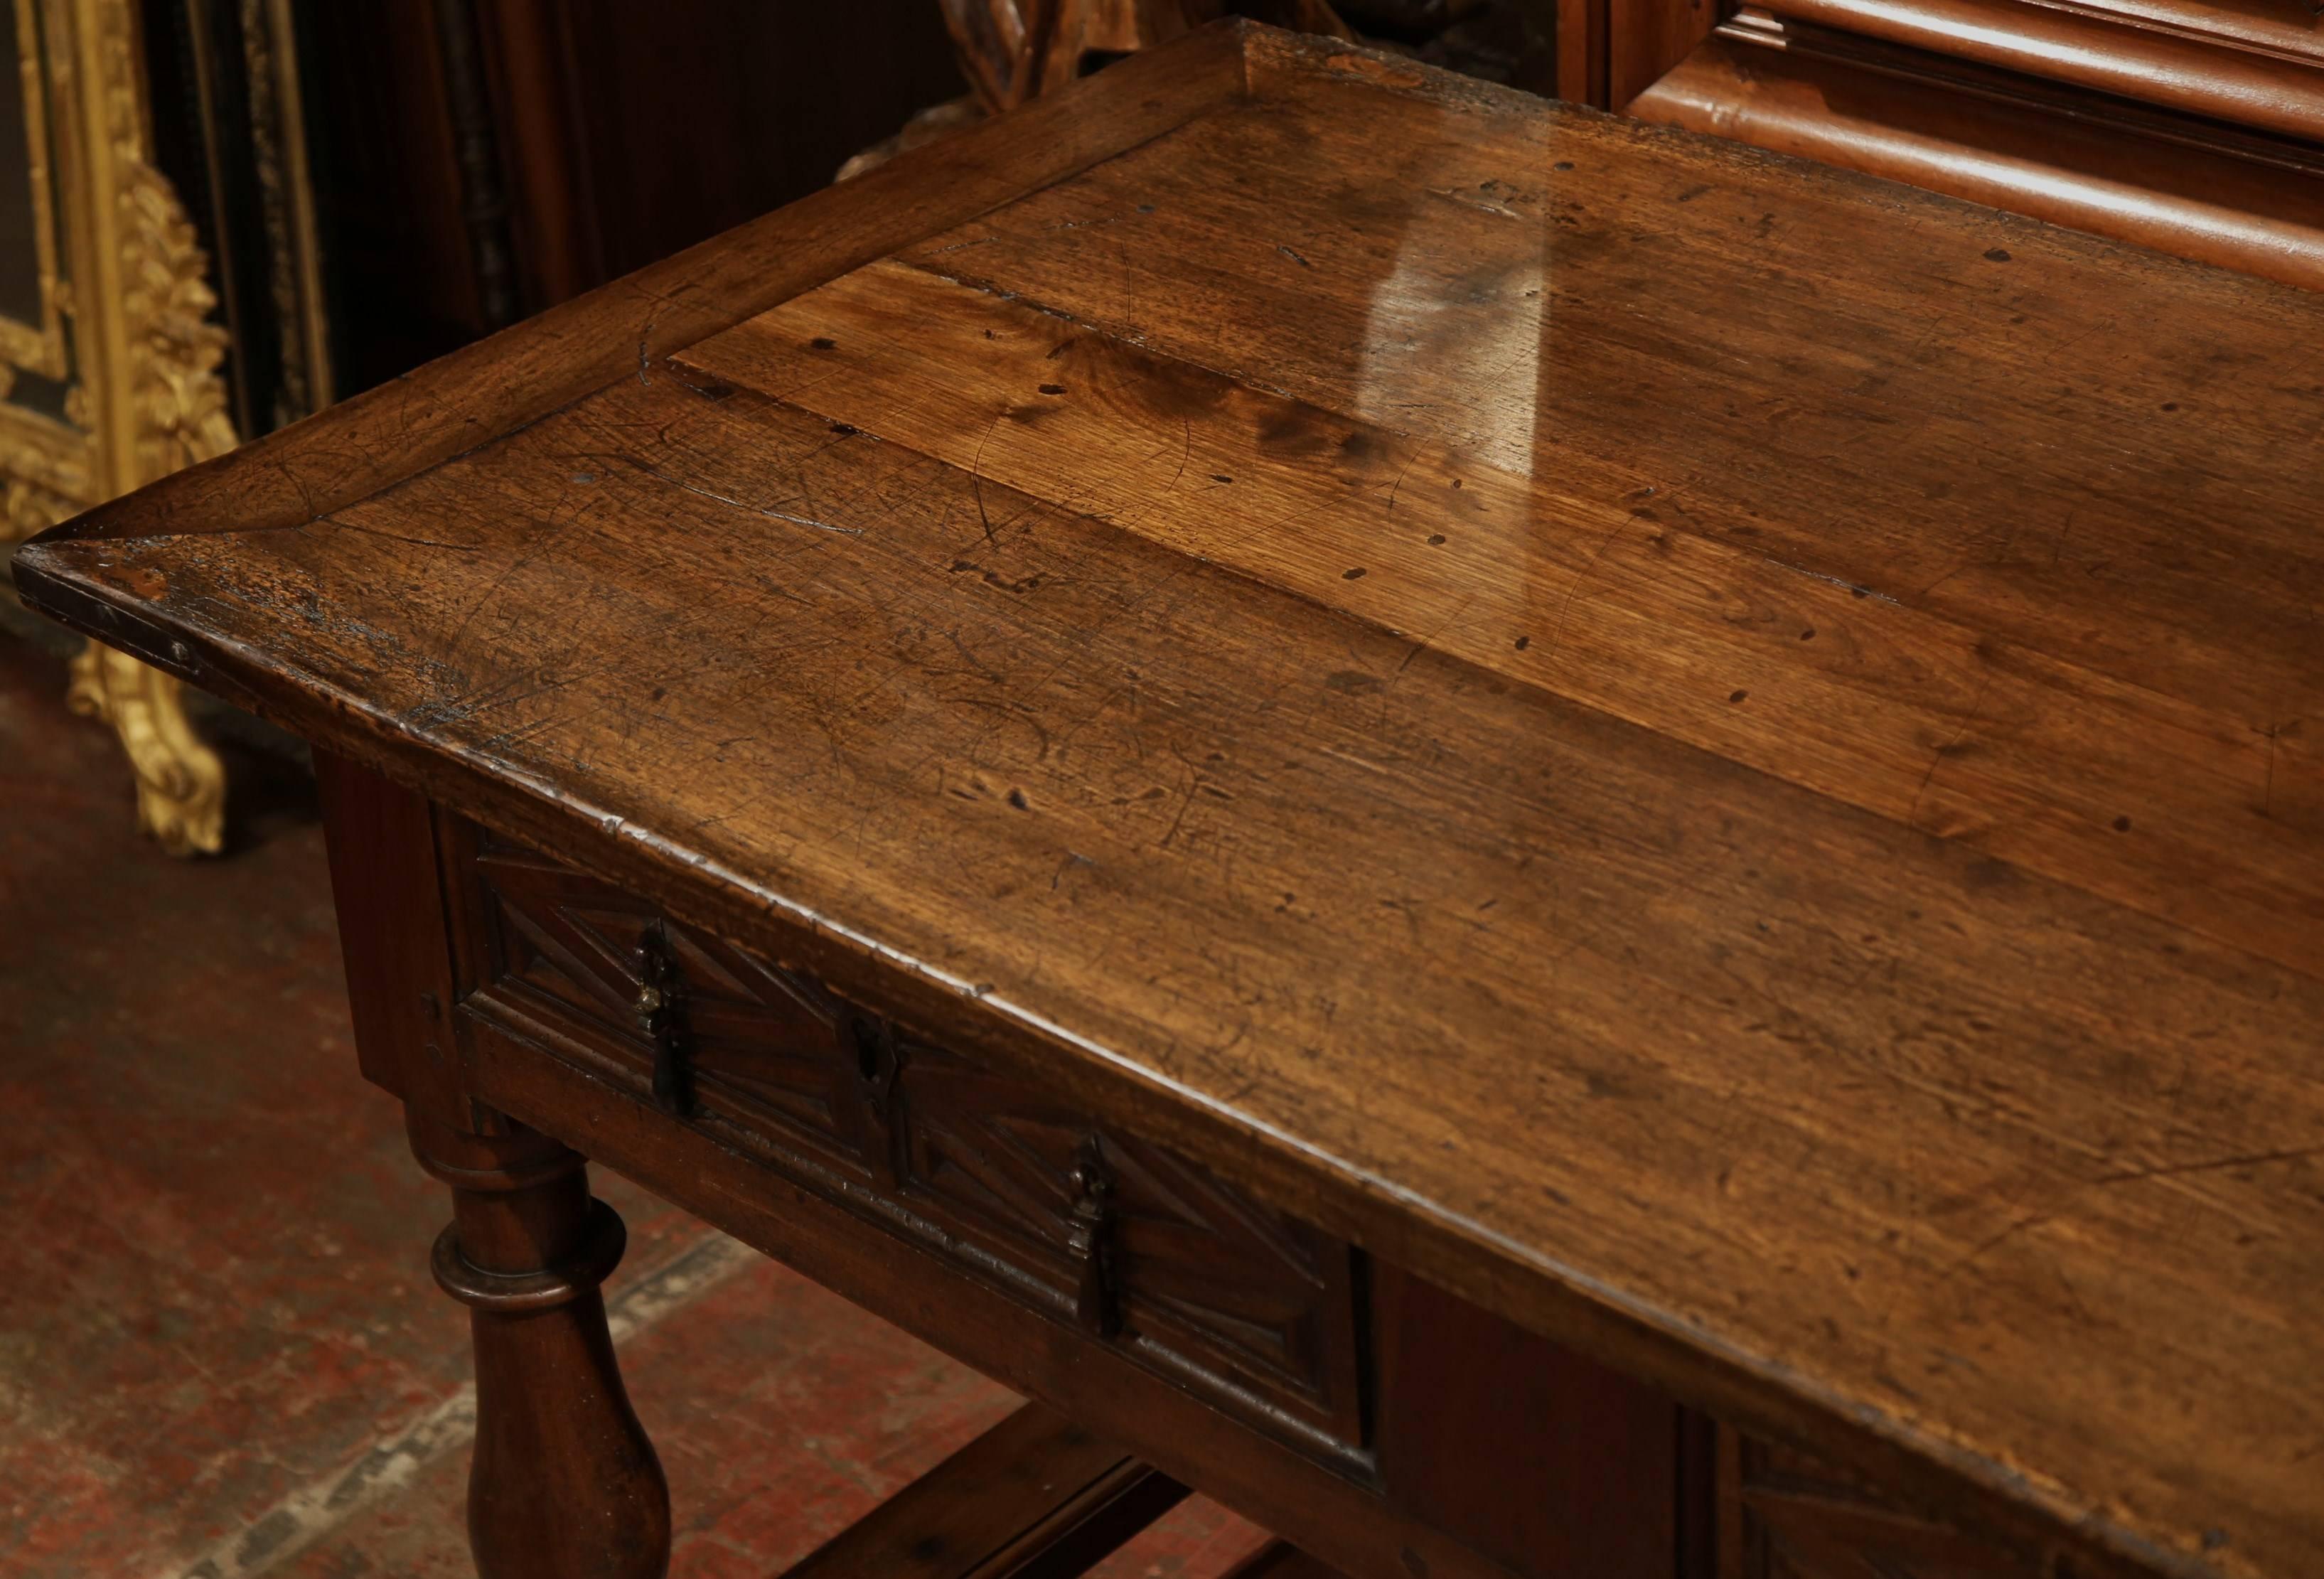 Hand-Carved 18th Century, Spanish Carved Walnut Two-Drawer Console Table with Turned Legs